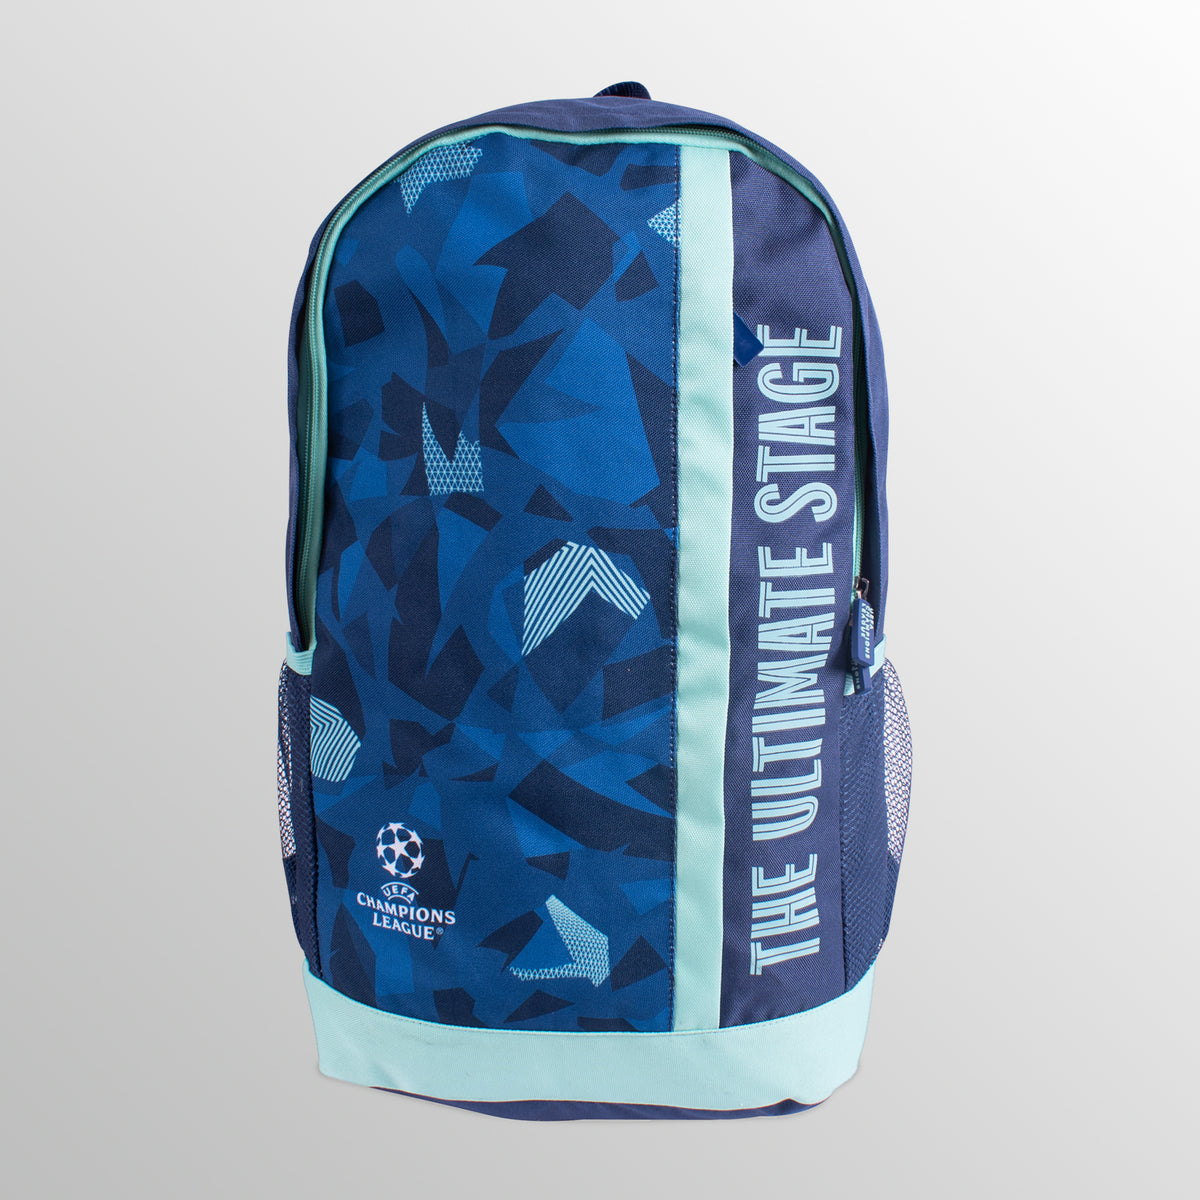 UEFA Champions League Slim Backpack UEFA Club Competitions Online Store